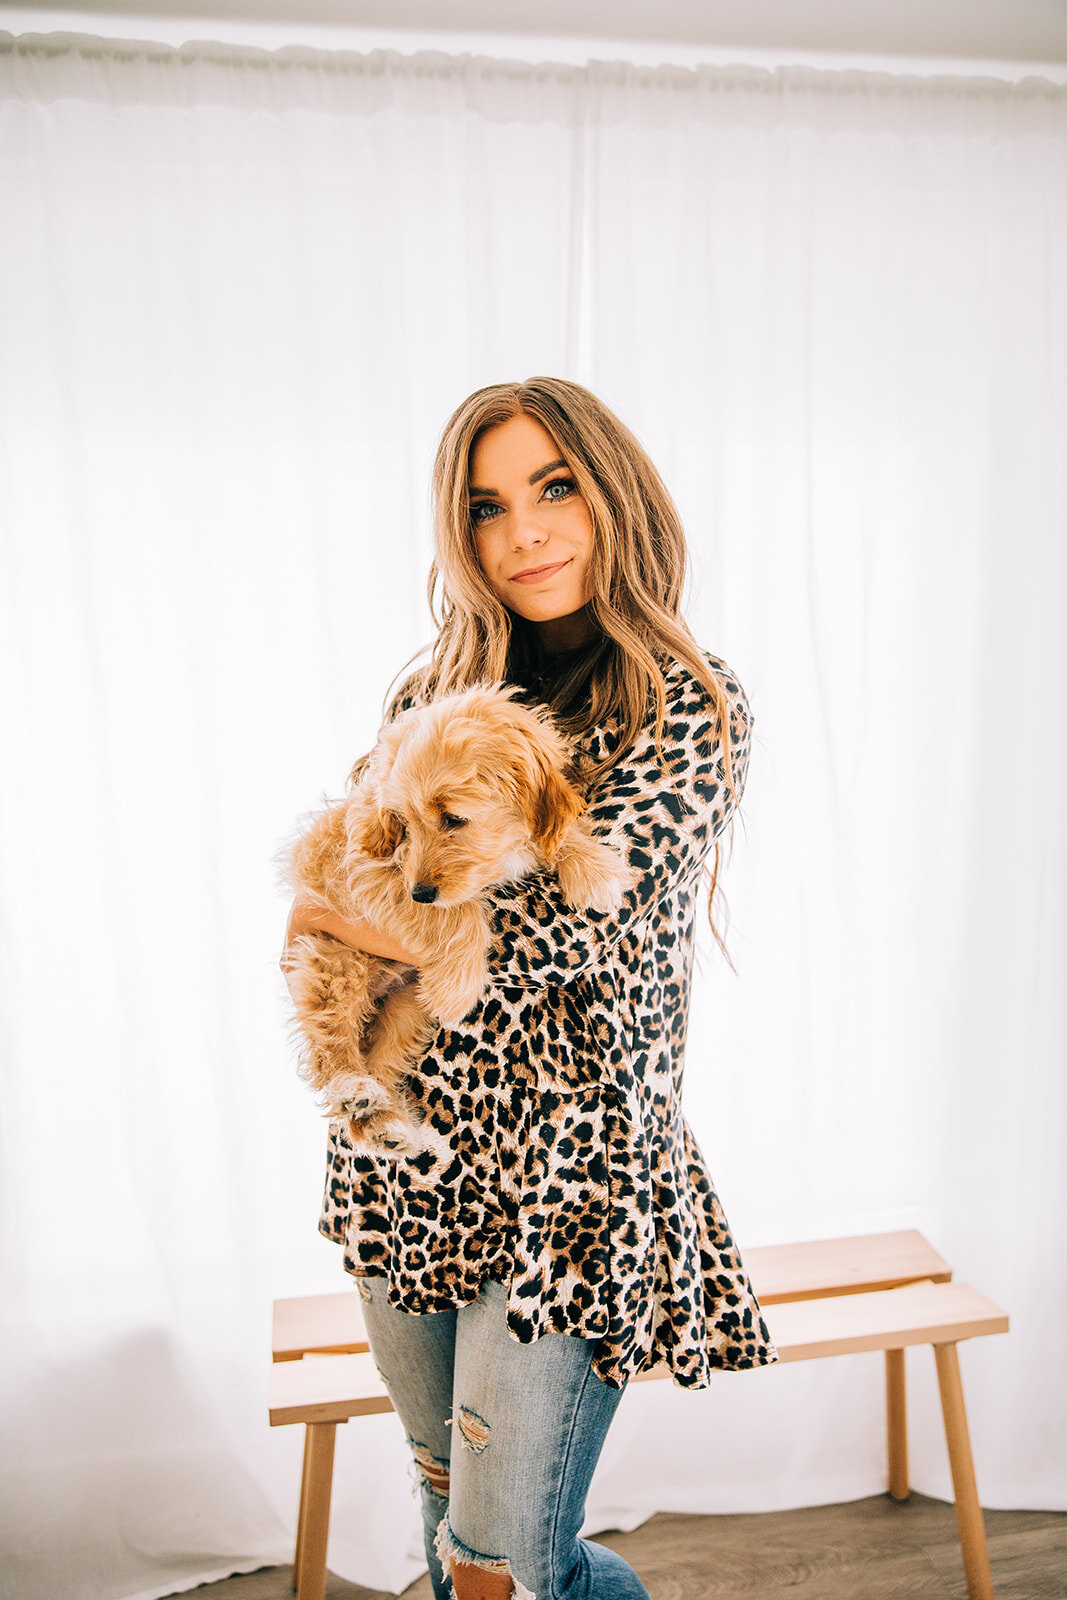  cheetah print leopard print patterned top holding a puppy at a photoshoot for online clothing boutique copper lane commercial photography distressed light wash jeans station studio backlist serious model face playing with dog at photoshoot for cloth